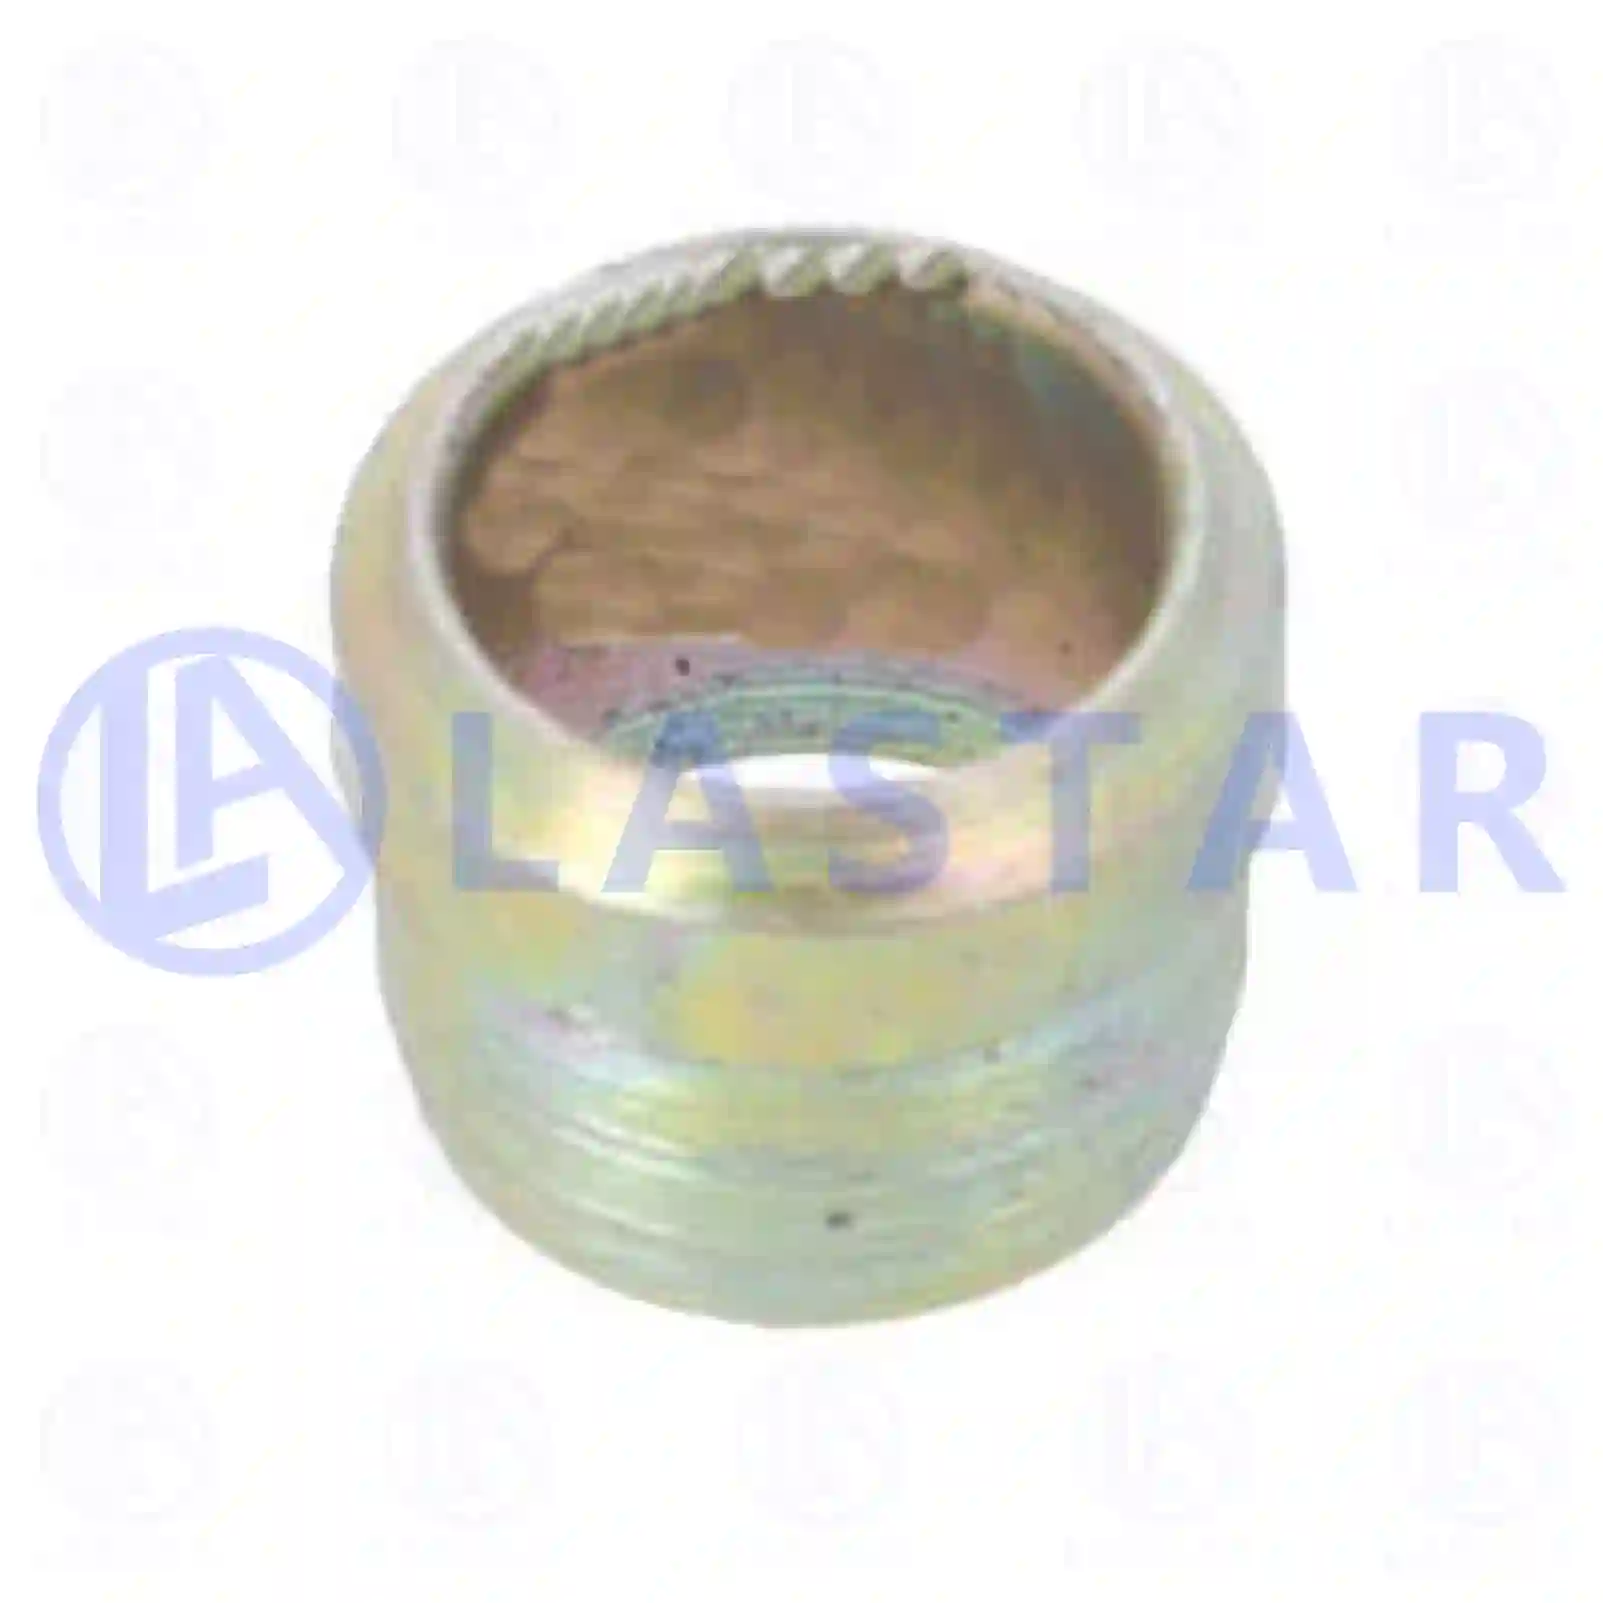 Compressed Air Cutting ring, la no: 77725695 ,  oem no:0149707, 149707, 003861008004, 003861008005, 074297008202, 312586, 813221 Lastar Spare Part | Truck Spare Parts, Auotomotive Spare Parts